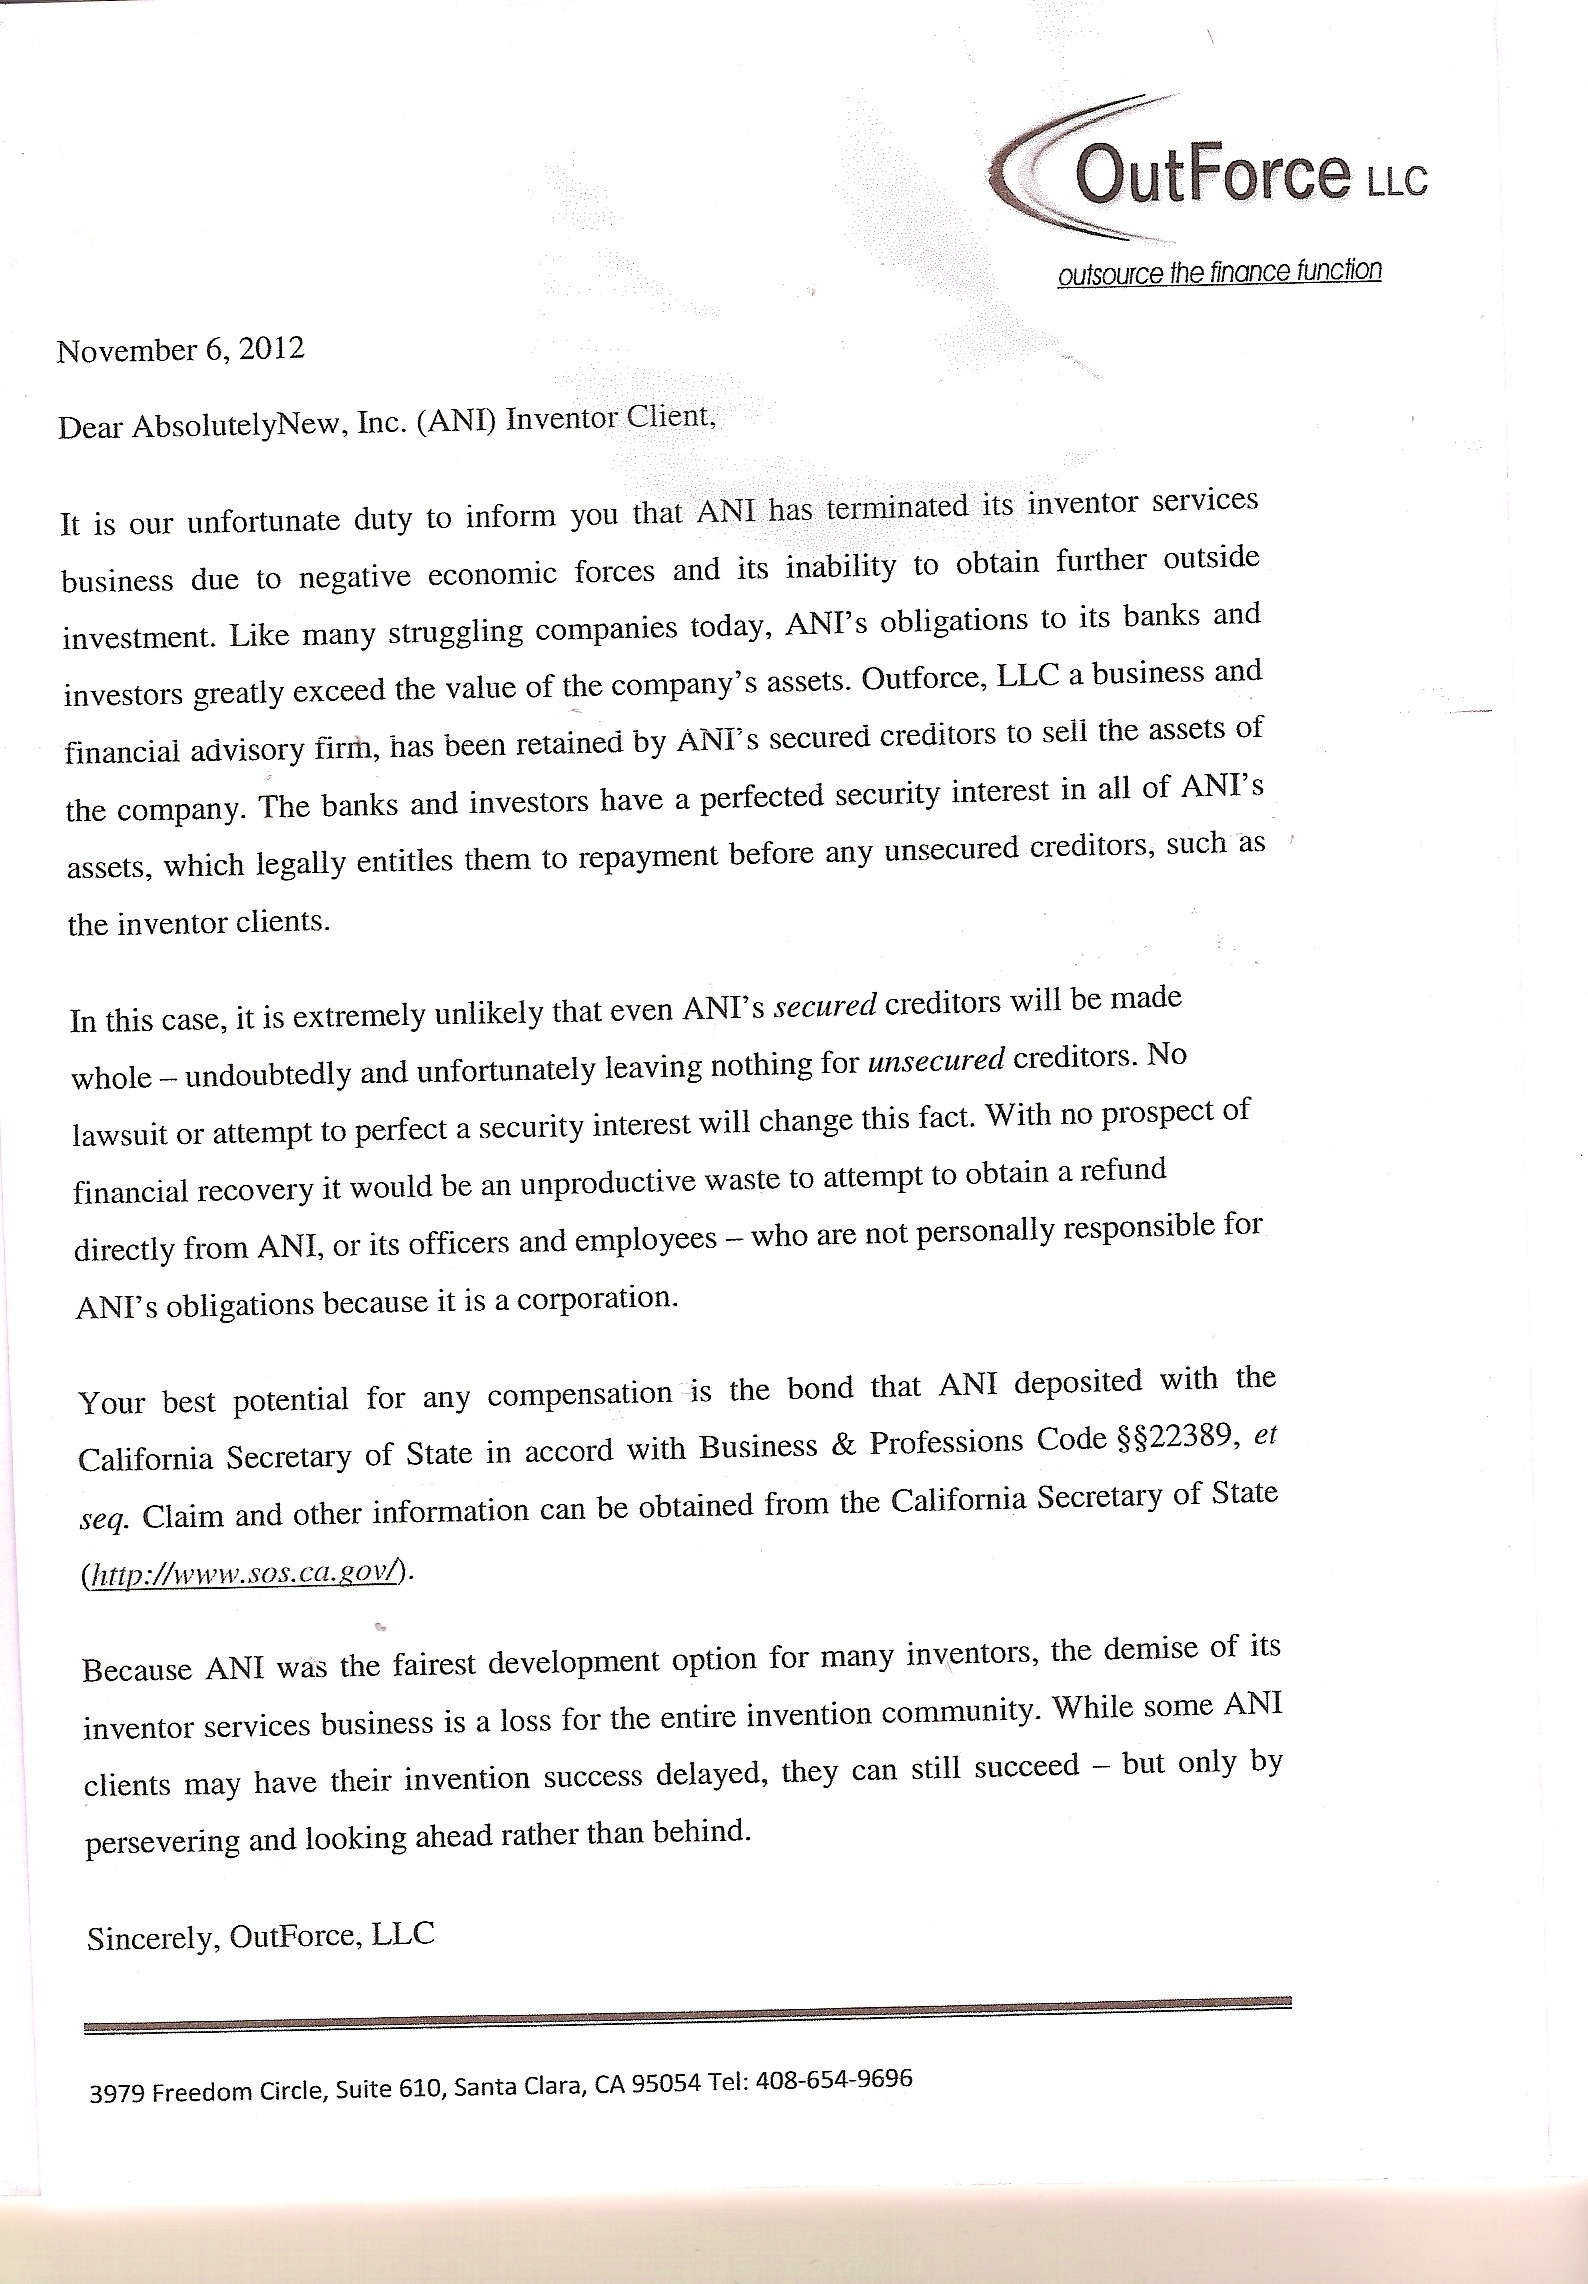 Letter I received notifying me of ANI discontinuing business.
After note:
ANI is back in business with different people and continuing where they left off.
website is absolutelynew.com